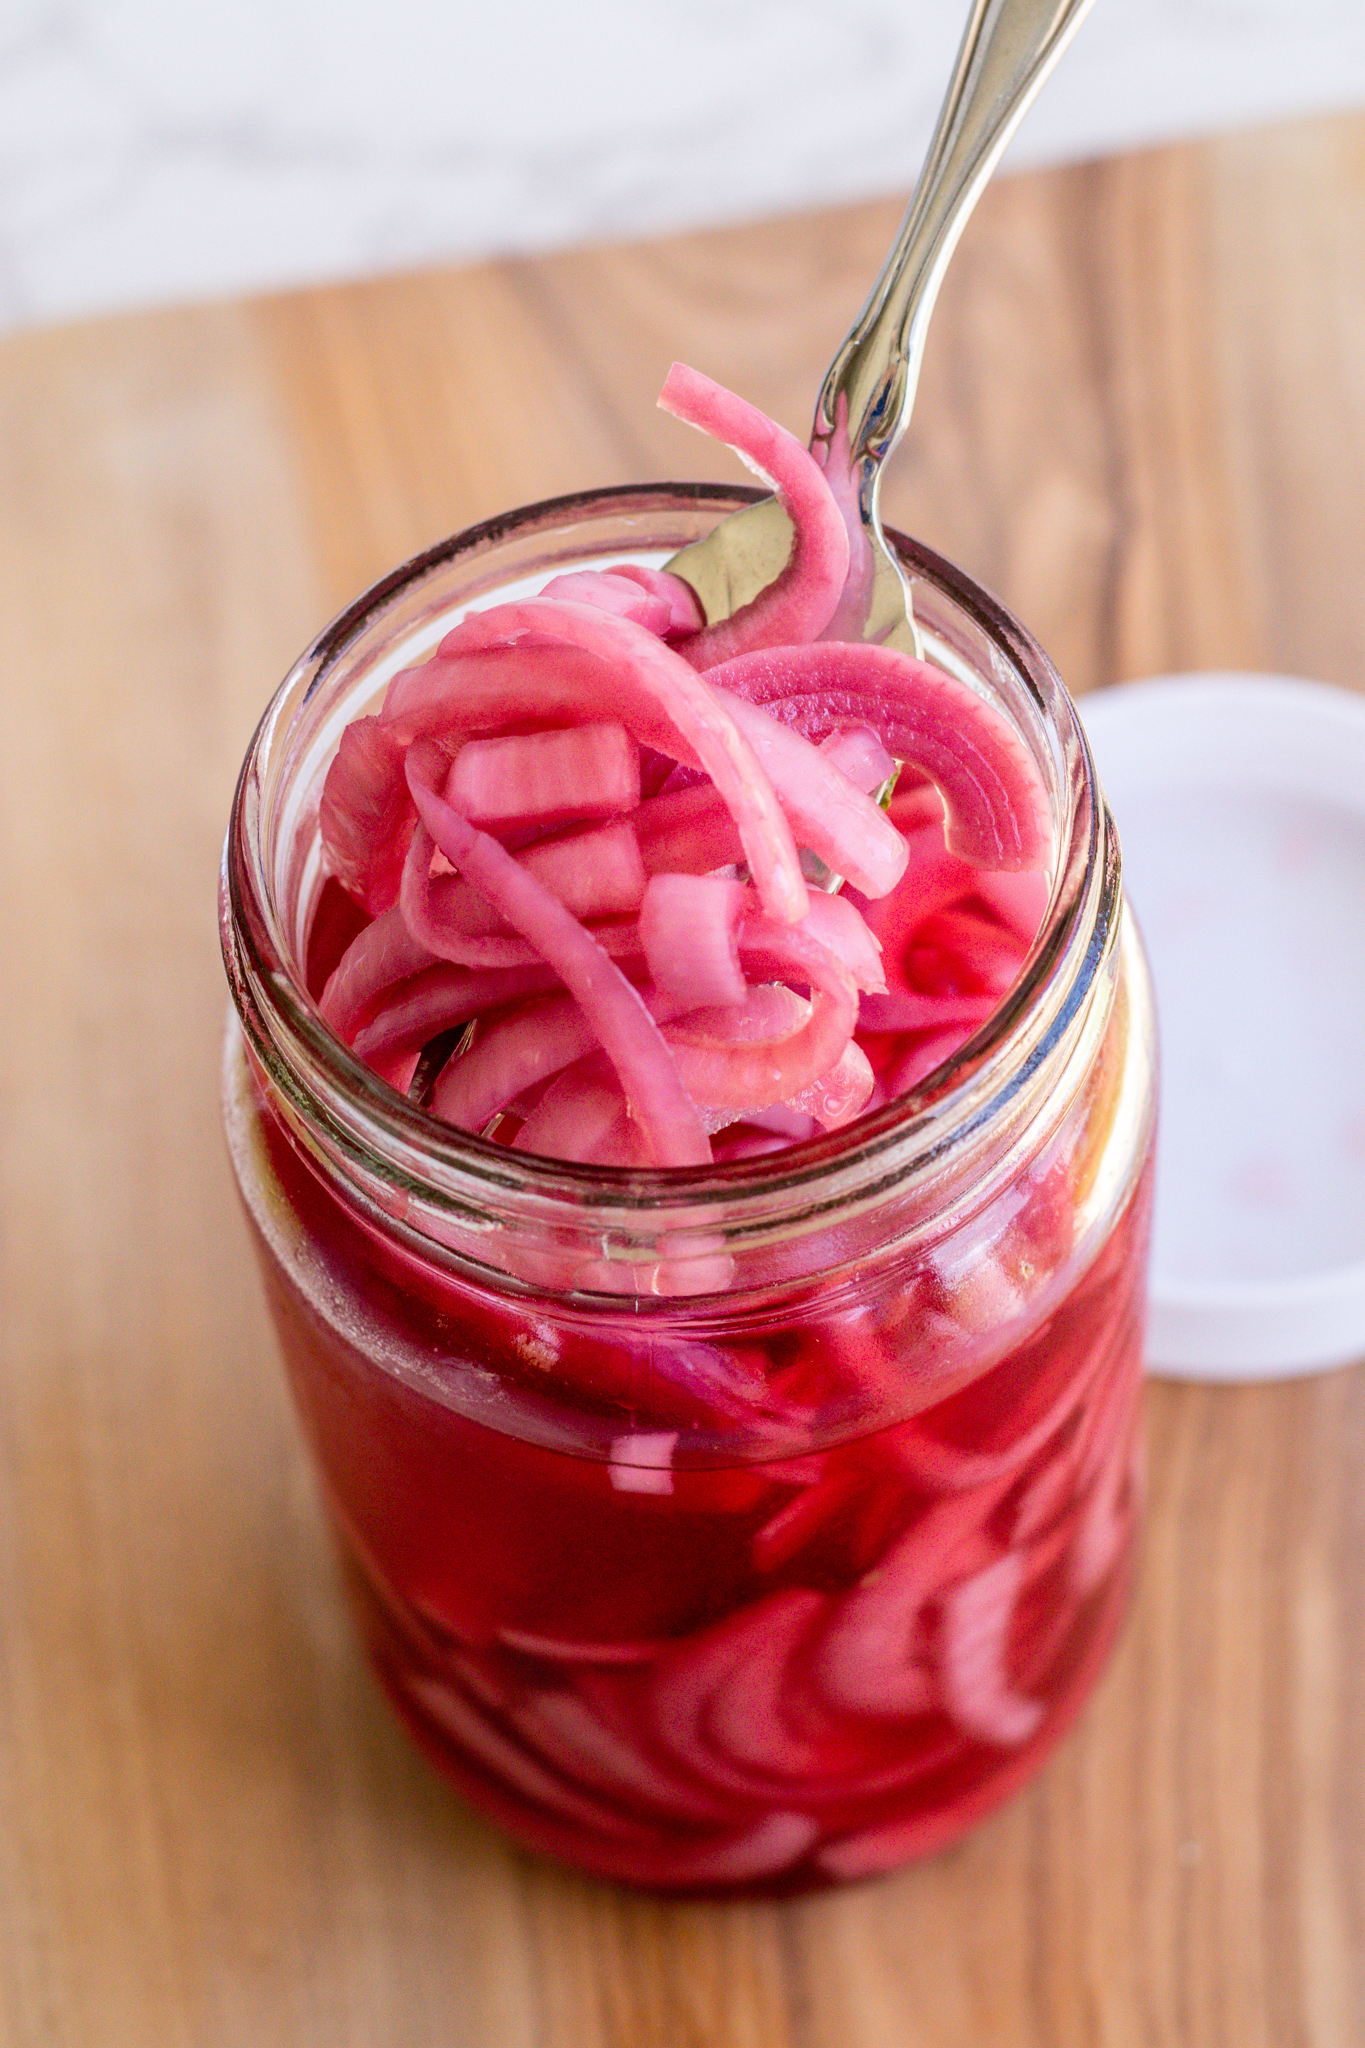 https://mariasmunchies.com/wp-content/uploads/2022/05/pickled-red-onion-4.jpg